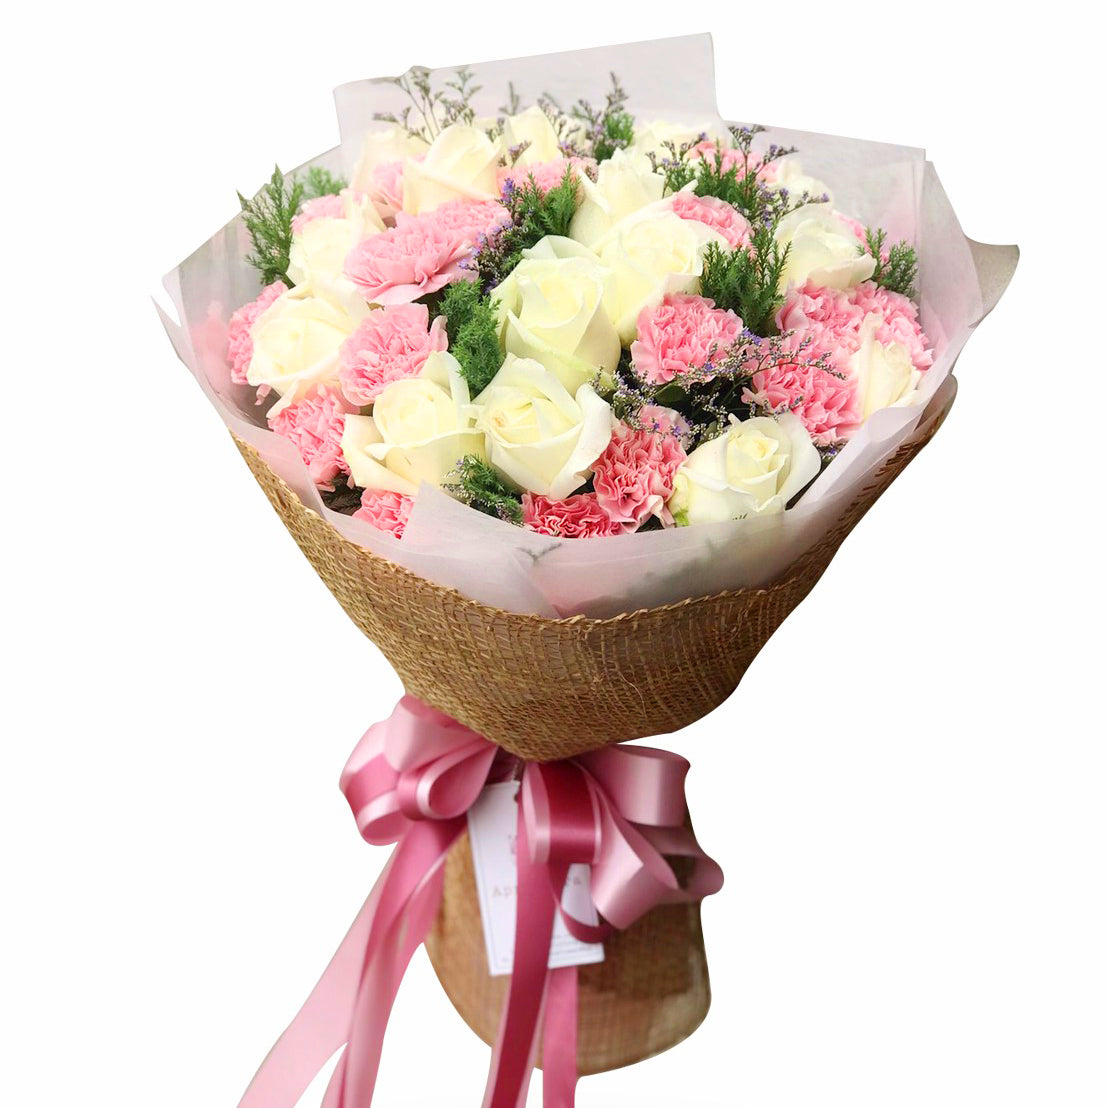 Girly Bouquet Of Roses, Carnation And Caspia - April Flora